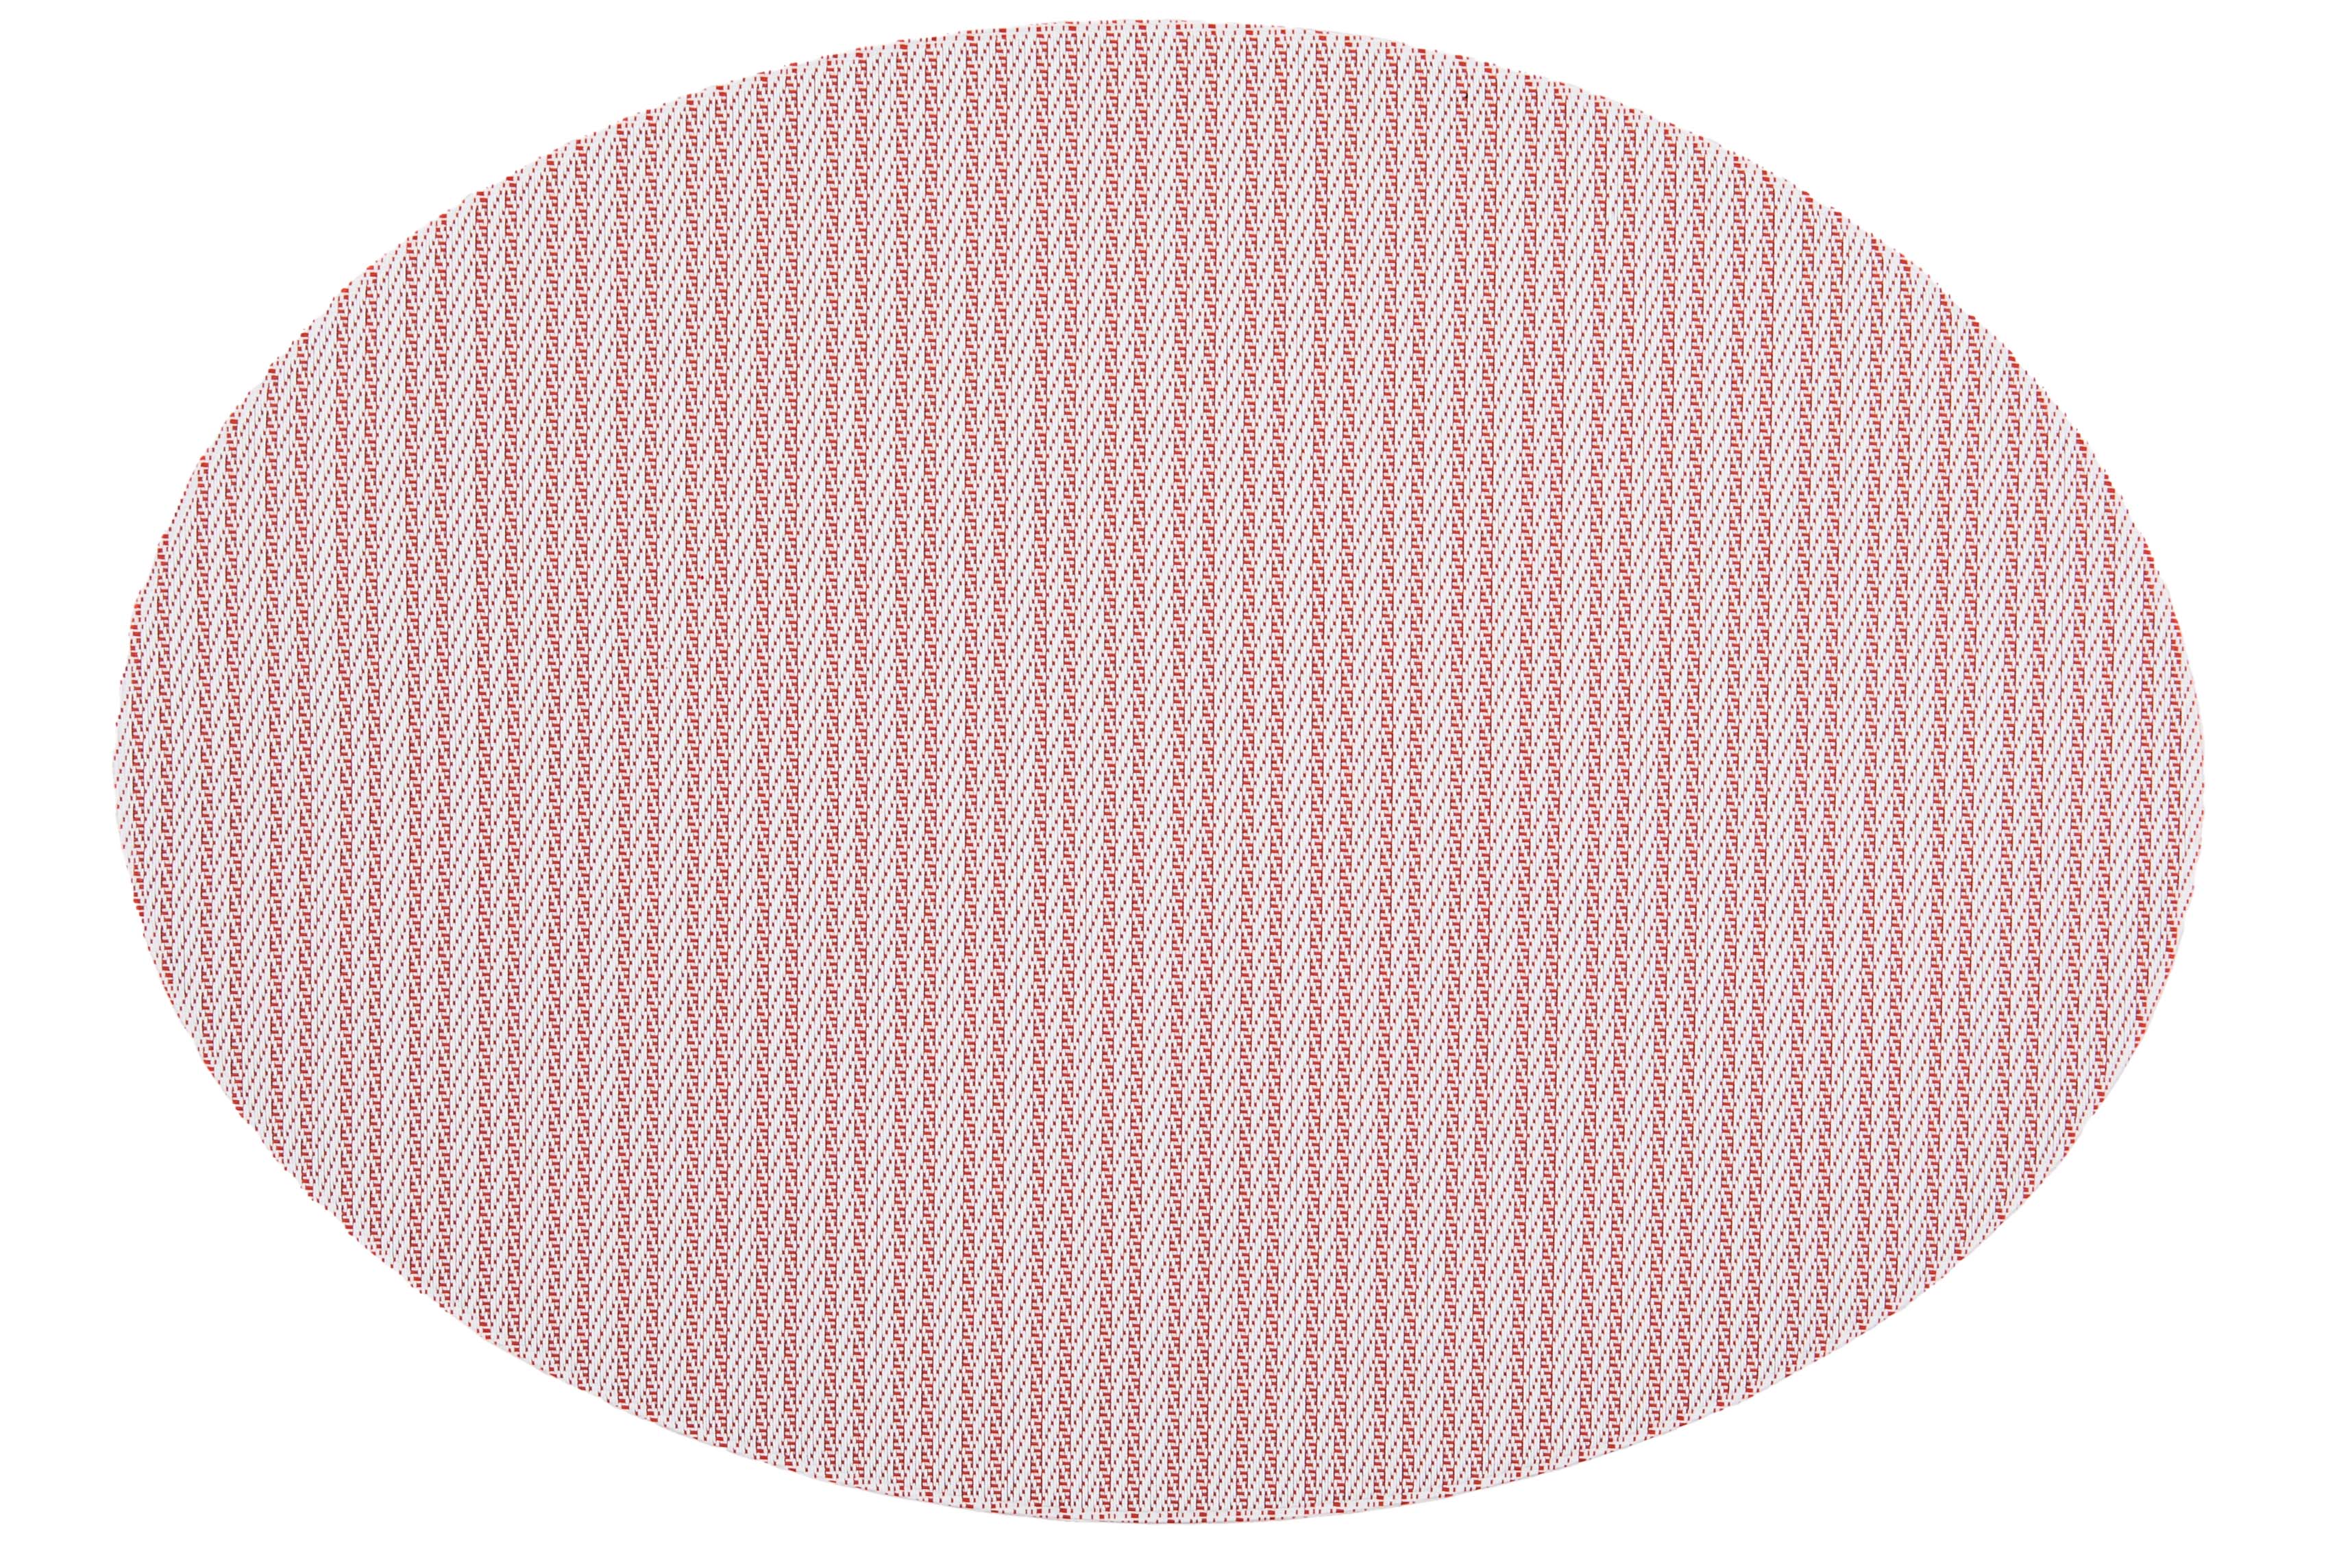 Placemat FALLON oval, 33x45cm, double stripe red